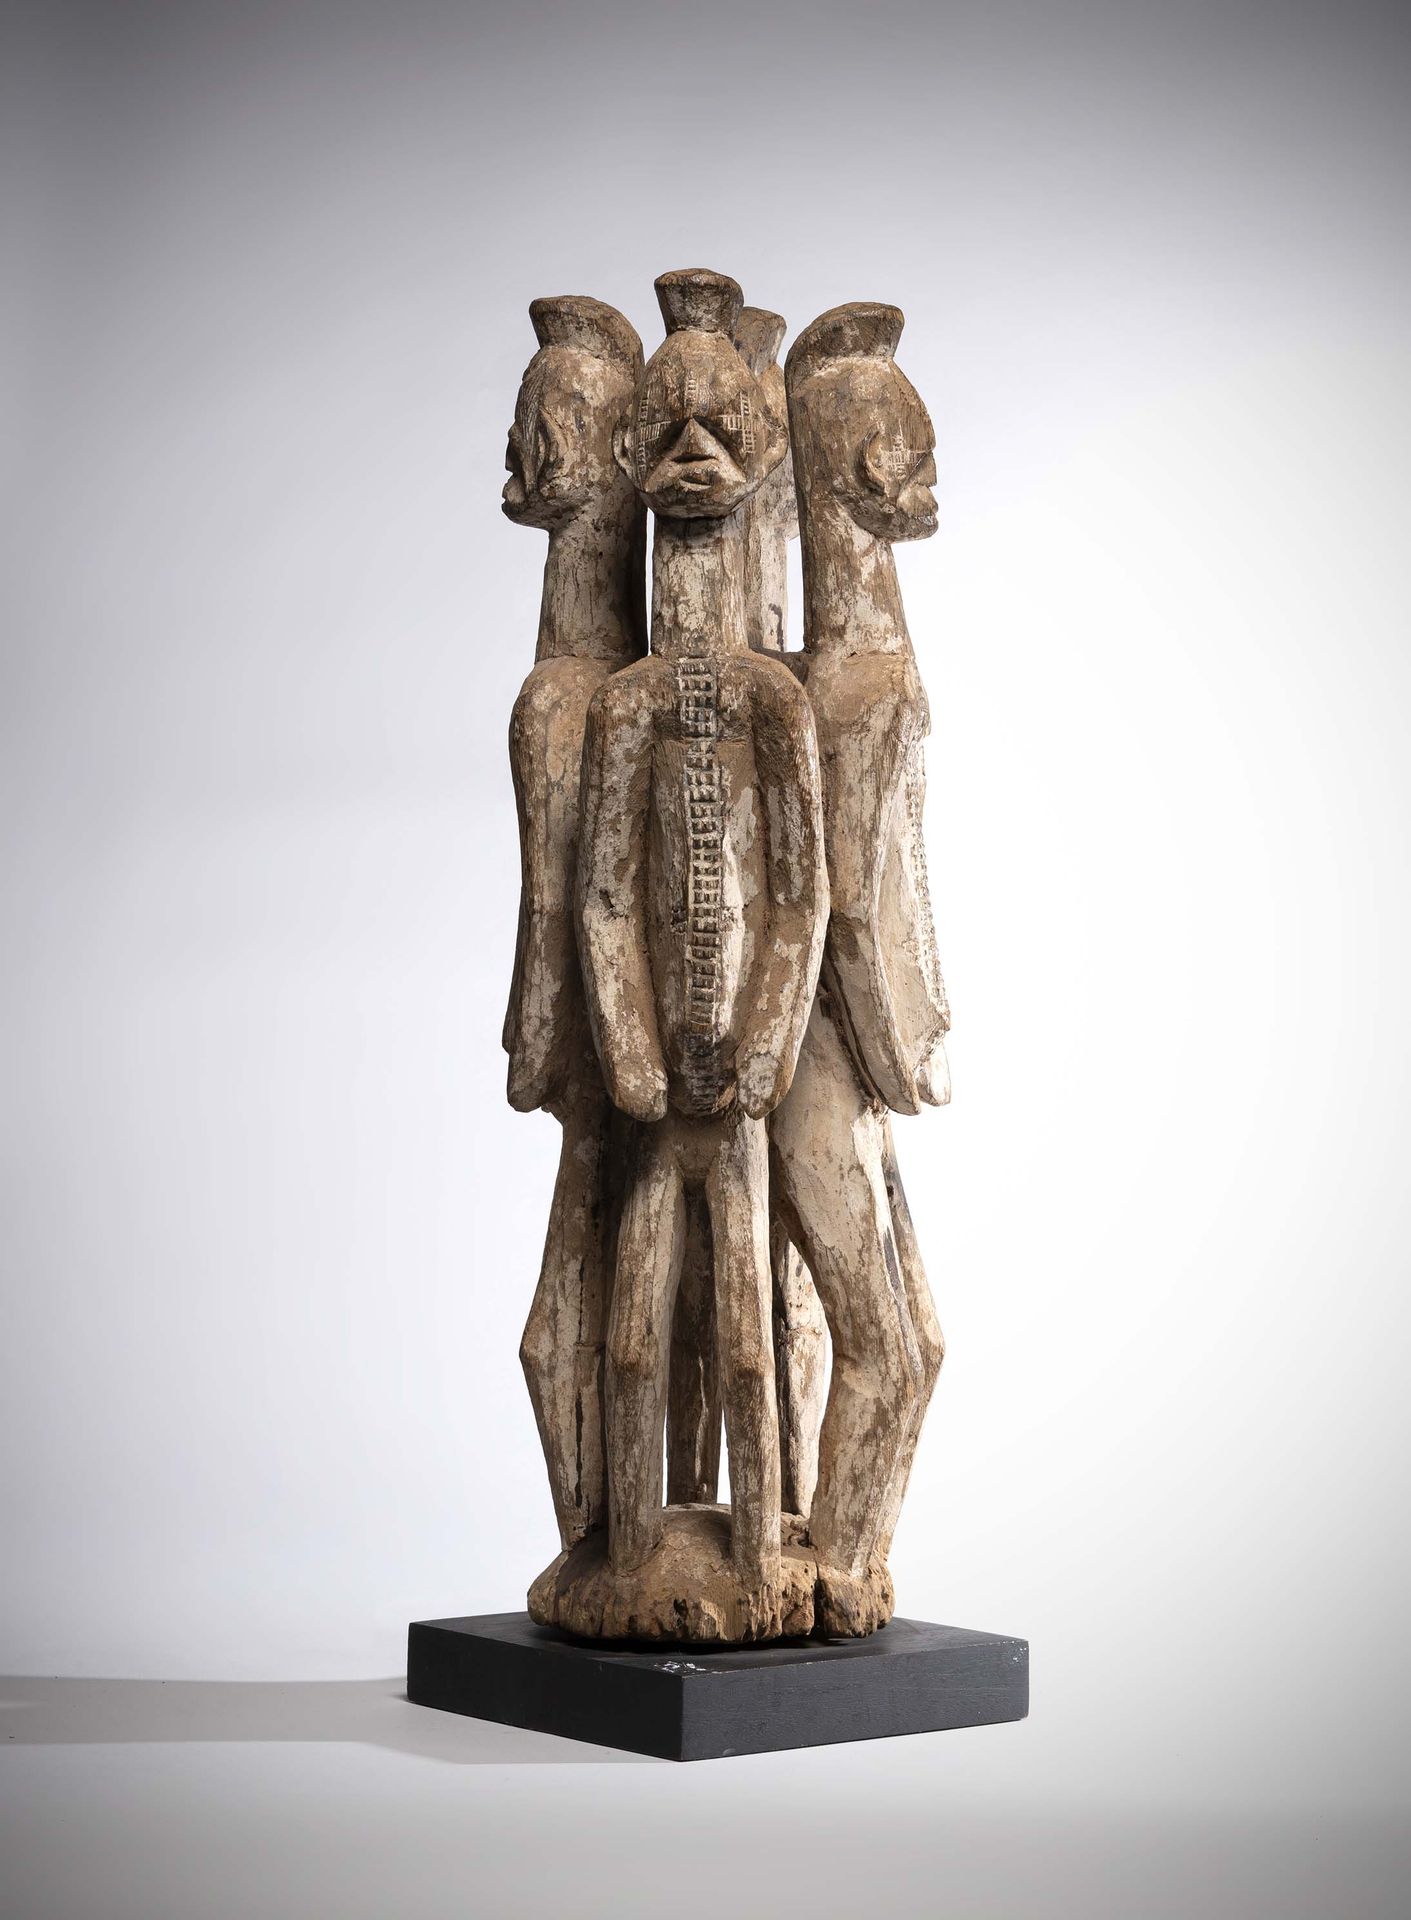 Null Ibo

(Nigeria) Important altar sculpture consisting of four male and female&hellip;